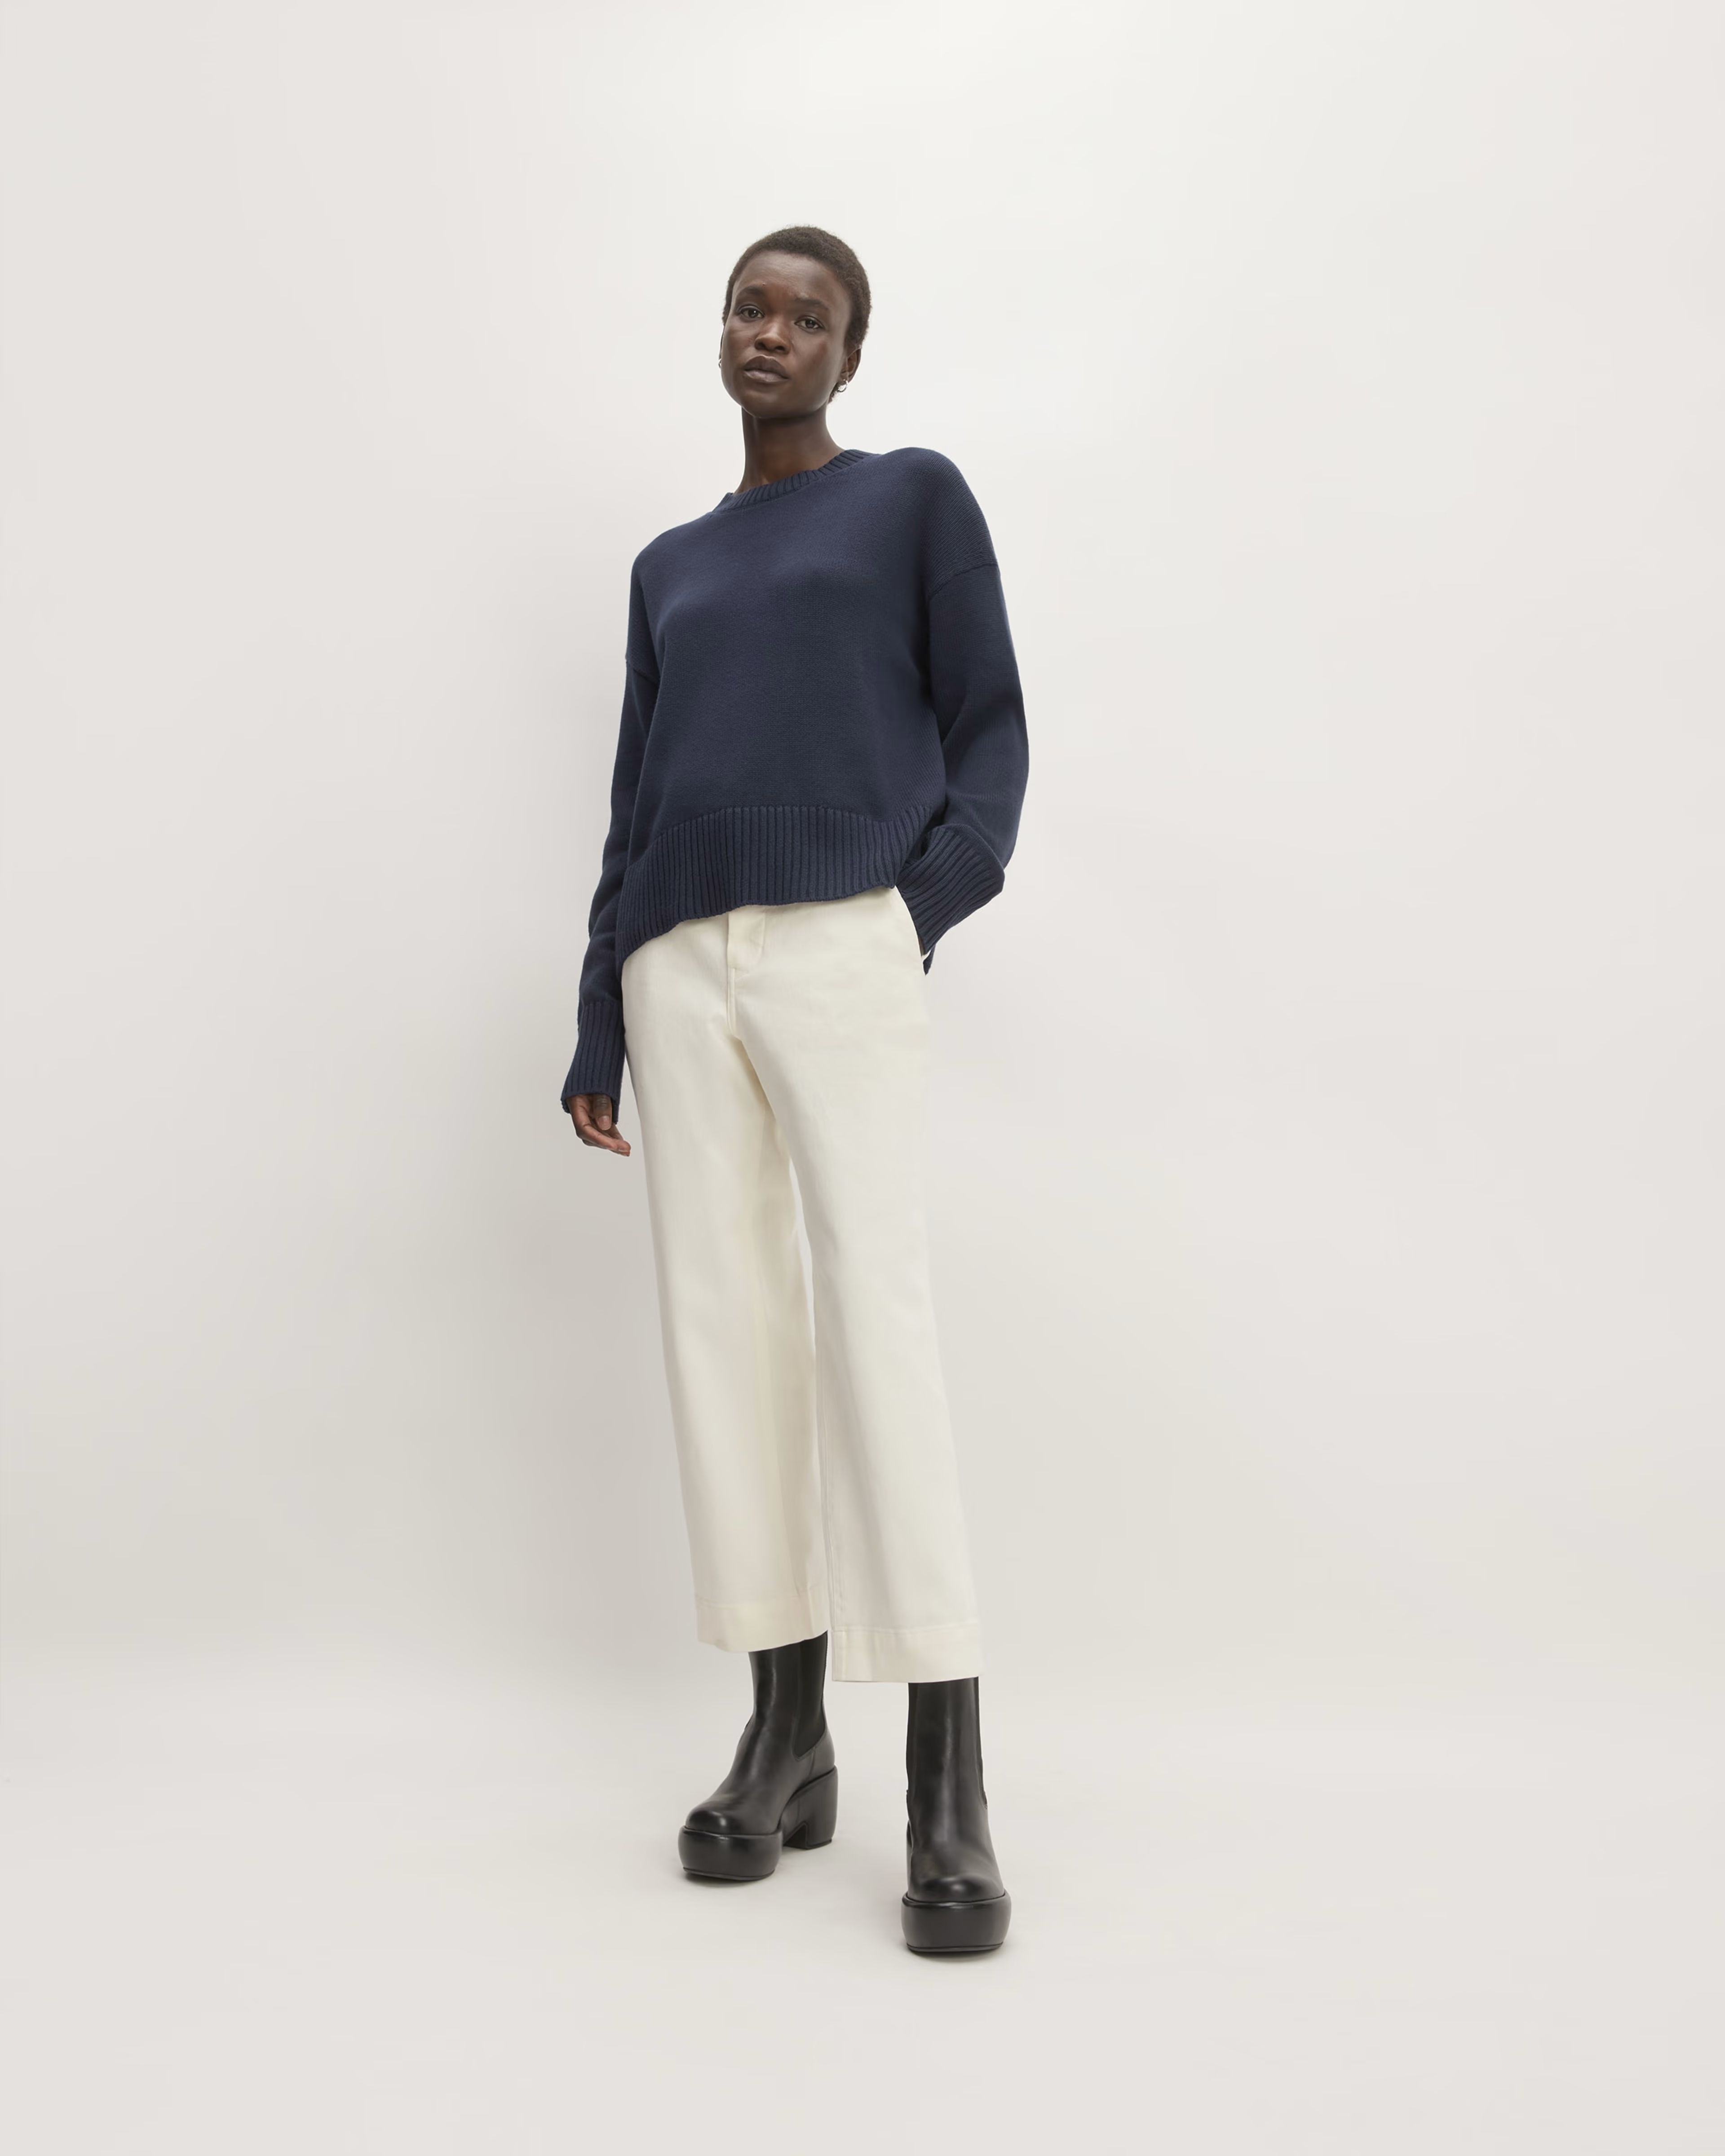 The Organic Cotton Crew Sweater$984.6 (107 Reviews)4.6 out of 5 stars. 107 reviews | Everlane